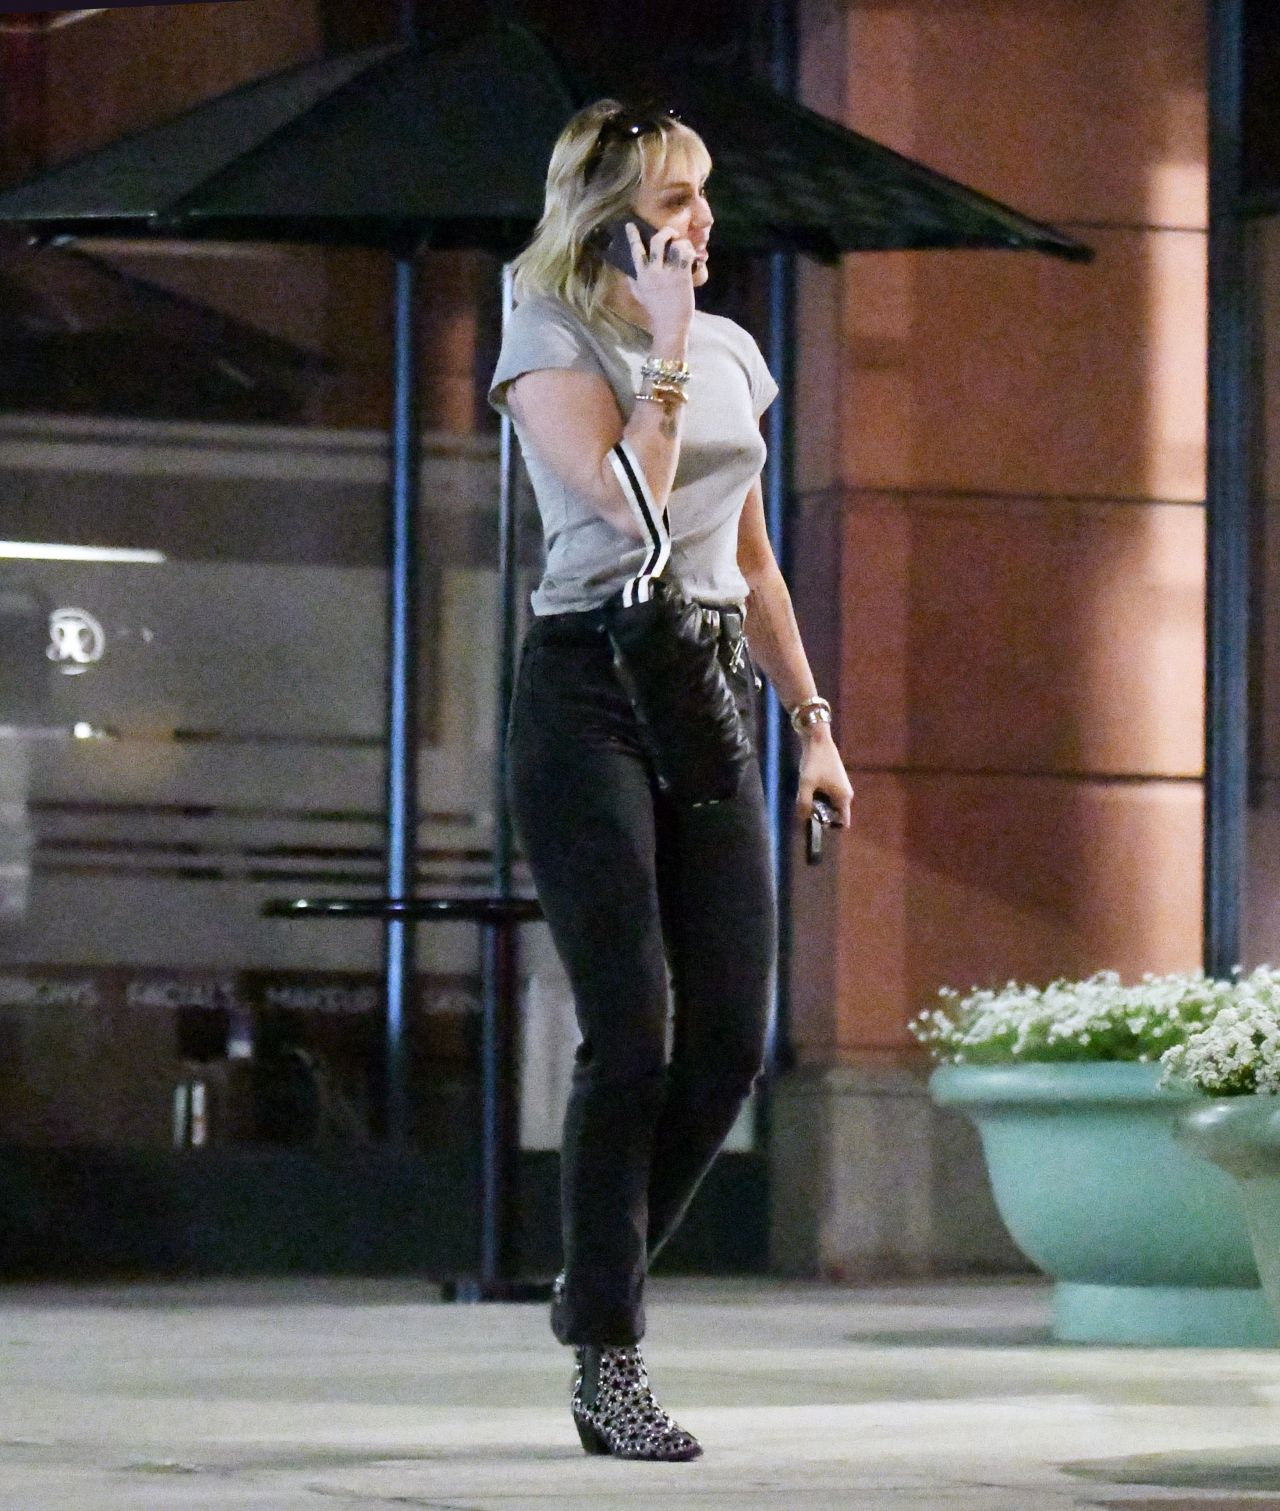 https://celebmafia.com/wp-content/uploads/2020/02/miley-cyrus-in-casual-outfit-los-angeles-02-02-2020-2.jpg